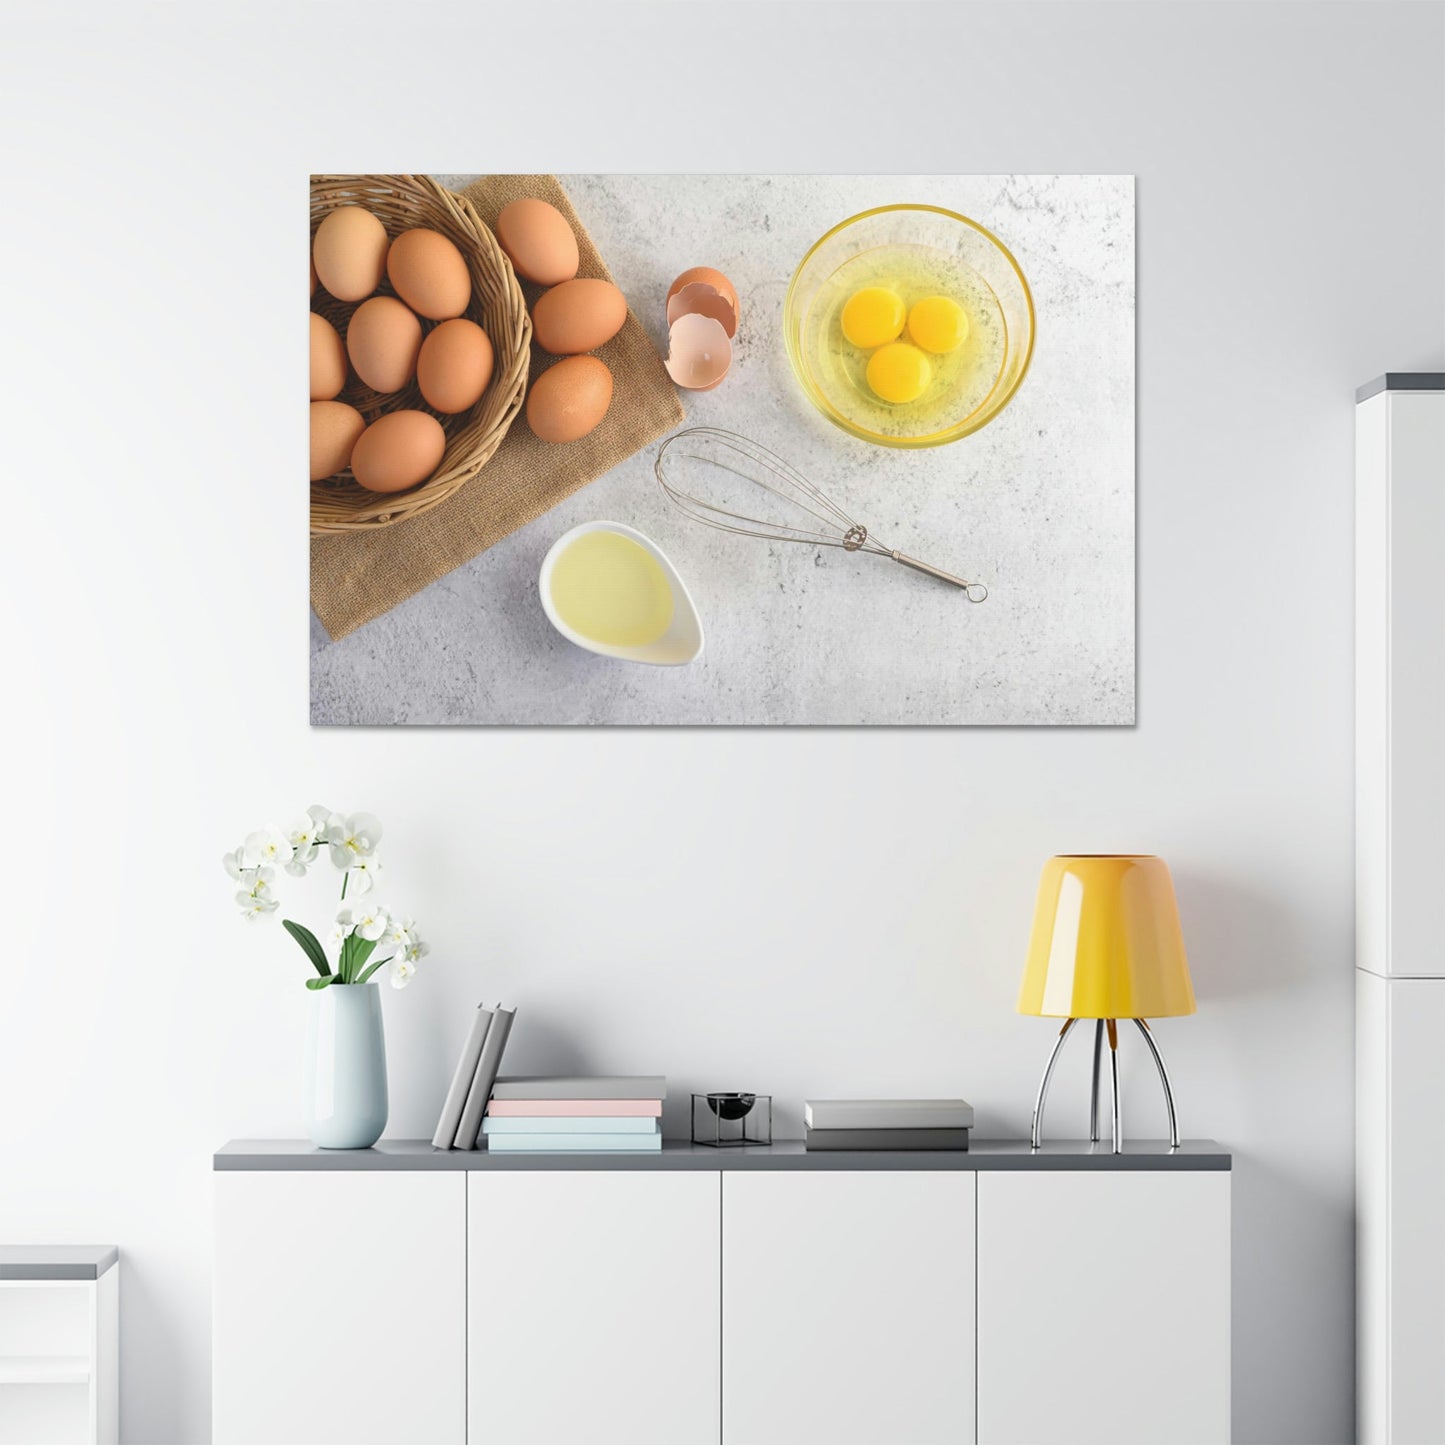 Egg-sploration of Fantasy: A Whimsical Painting of Eggs in a Dreamlike World